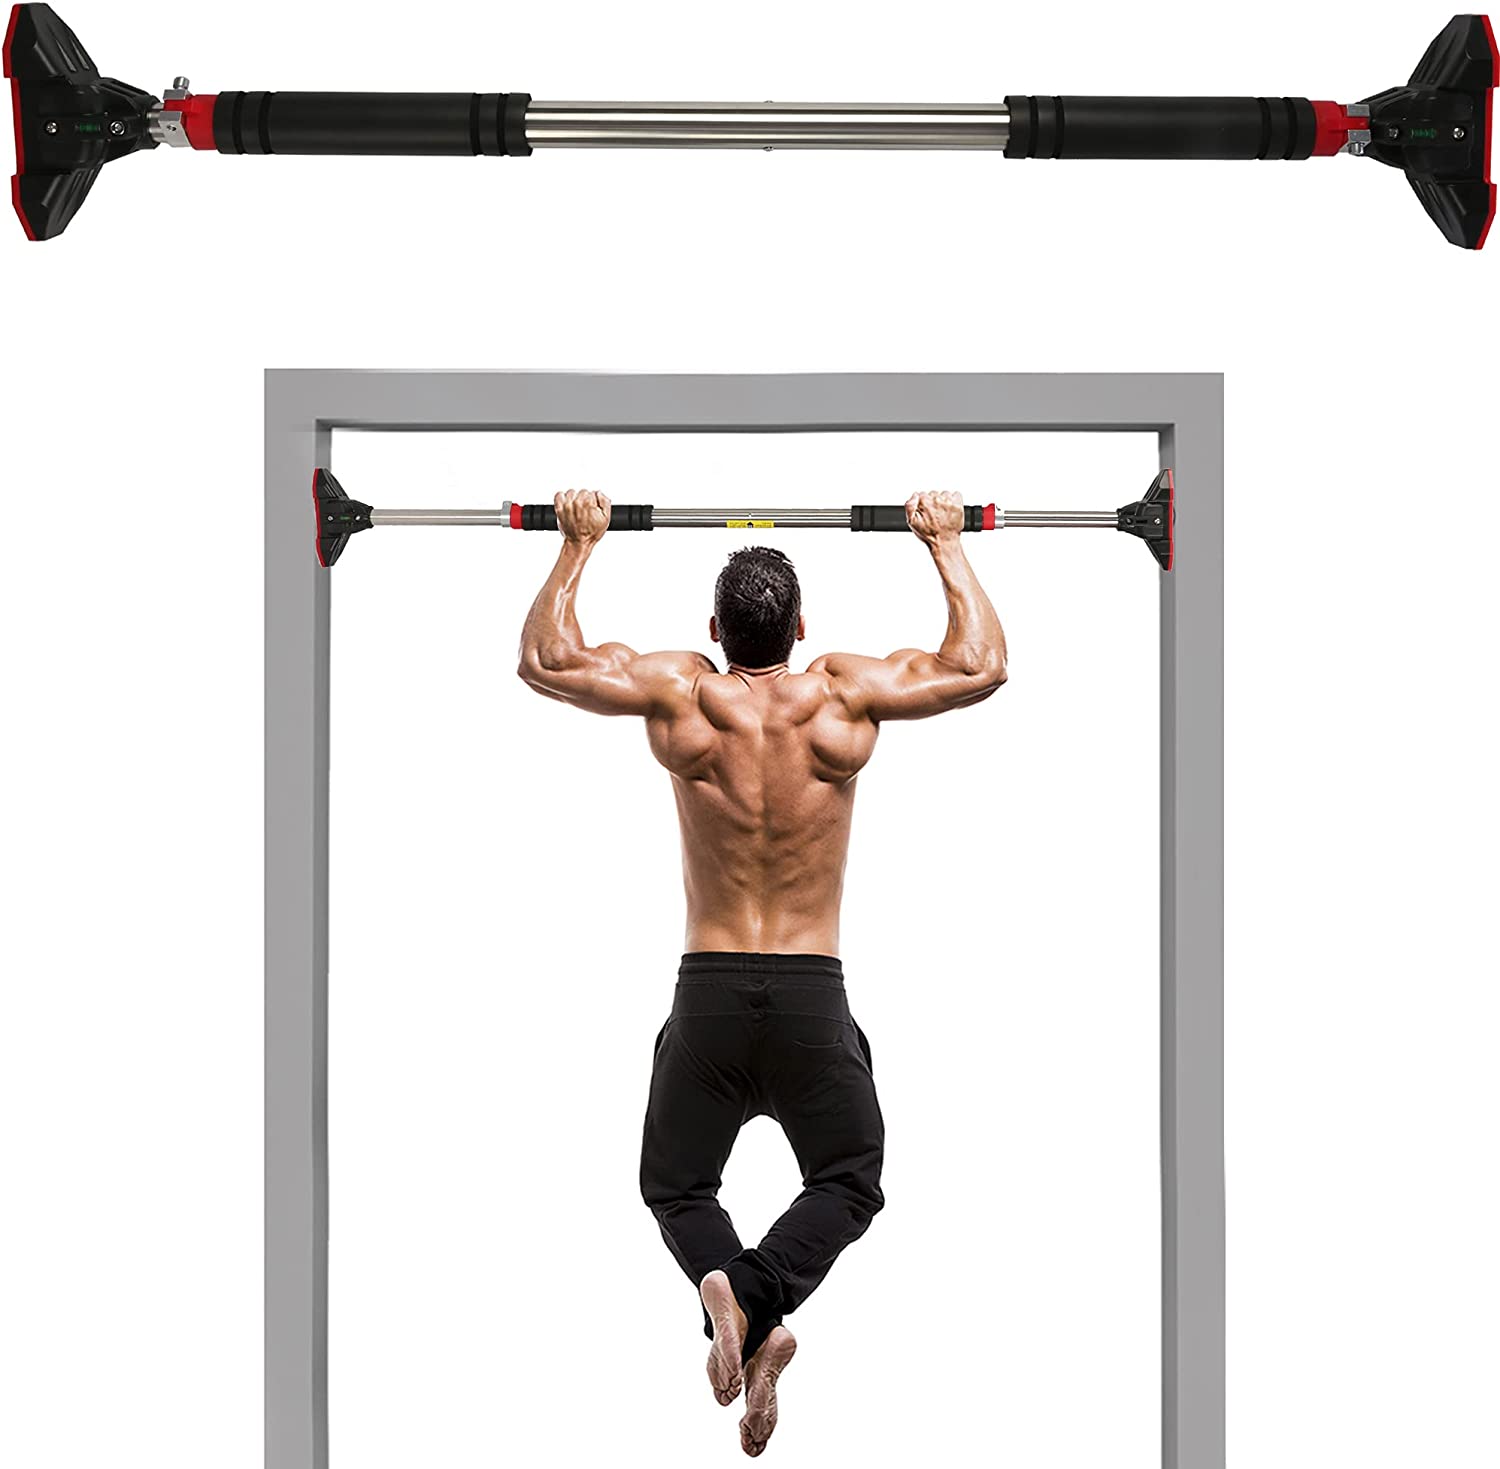 (Out of Stock) Adjustable 36-49 Inch Upper Body Workout Bar Chin Up Bar with Safe Lock, No Screw Installation